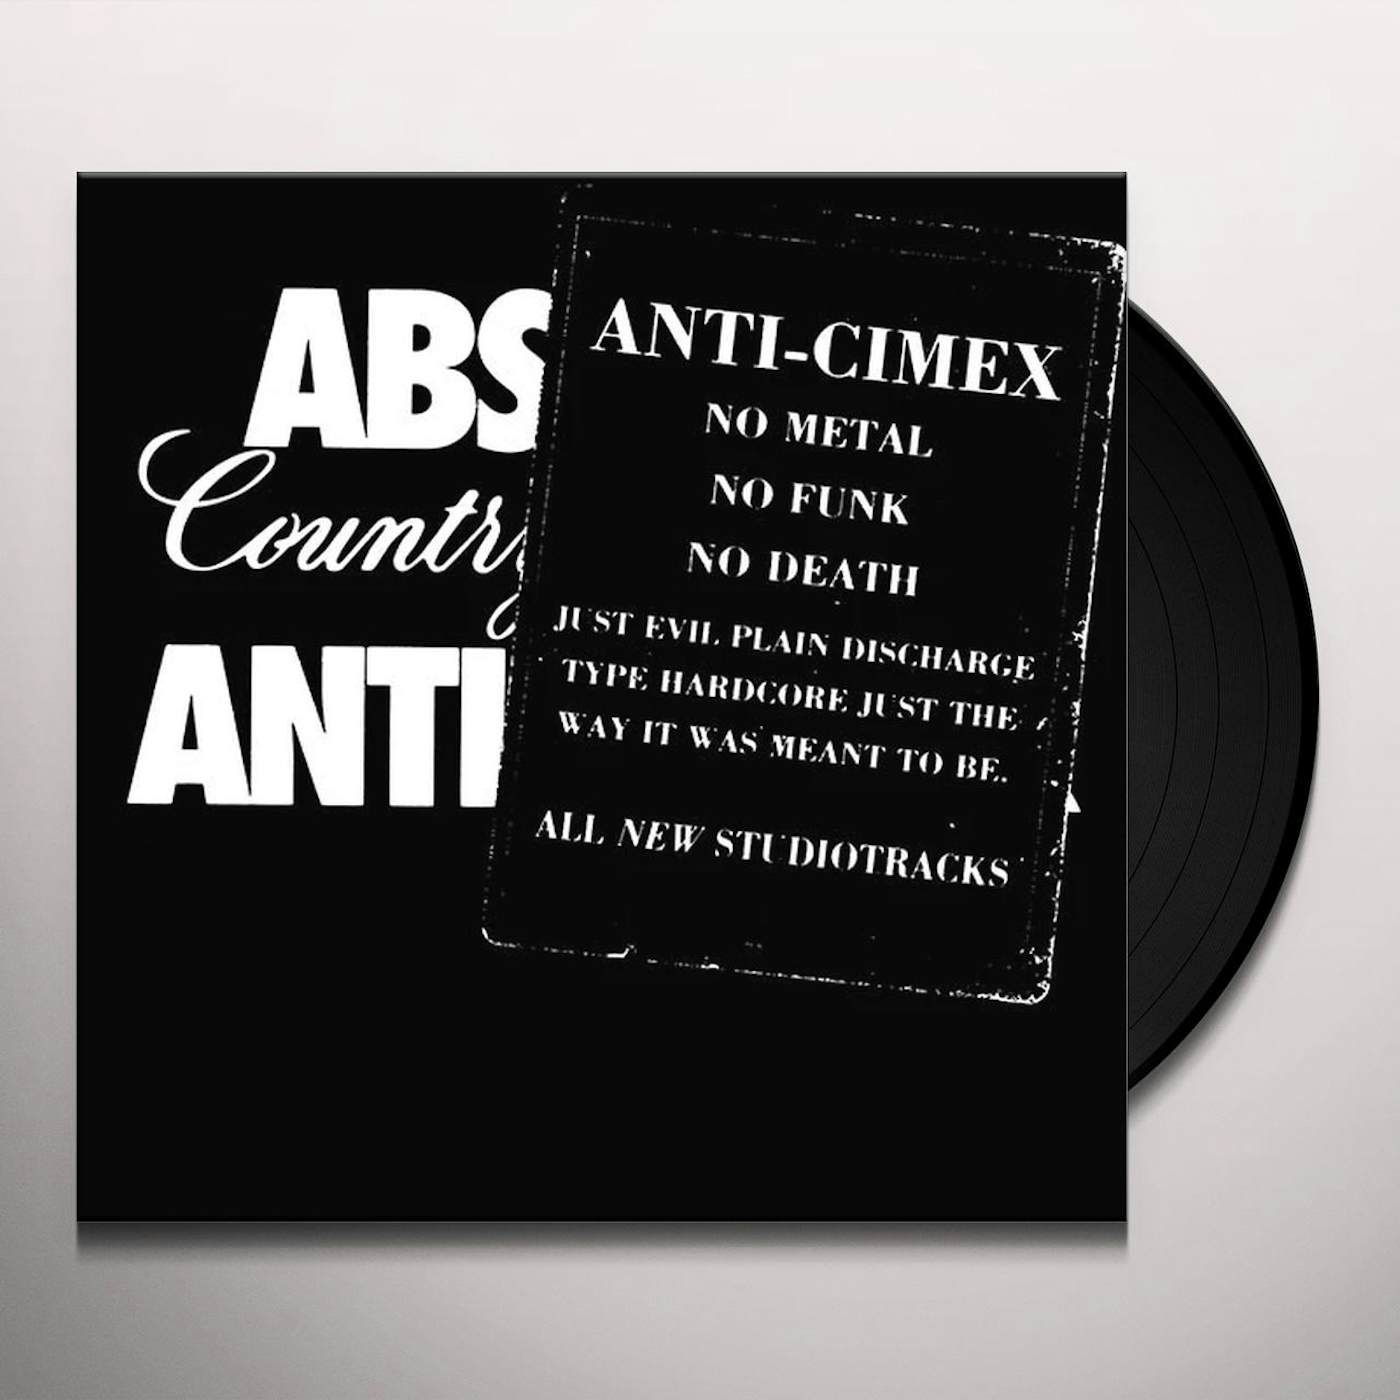 Anti Cimex Absolut country of sweden Vinyl Record